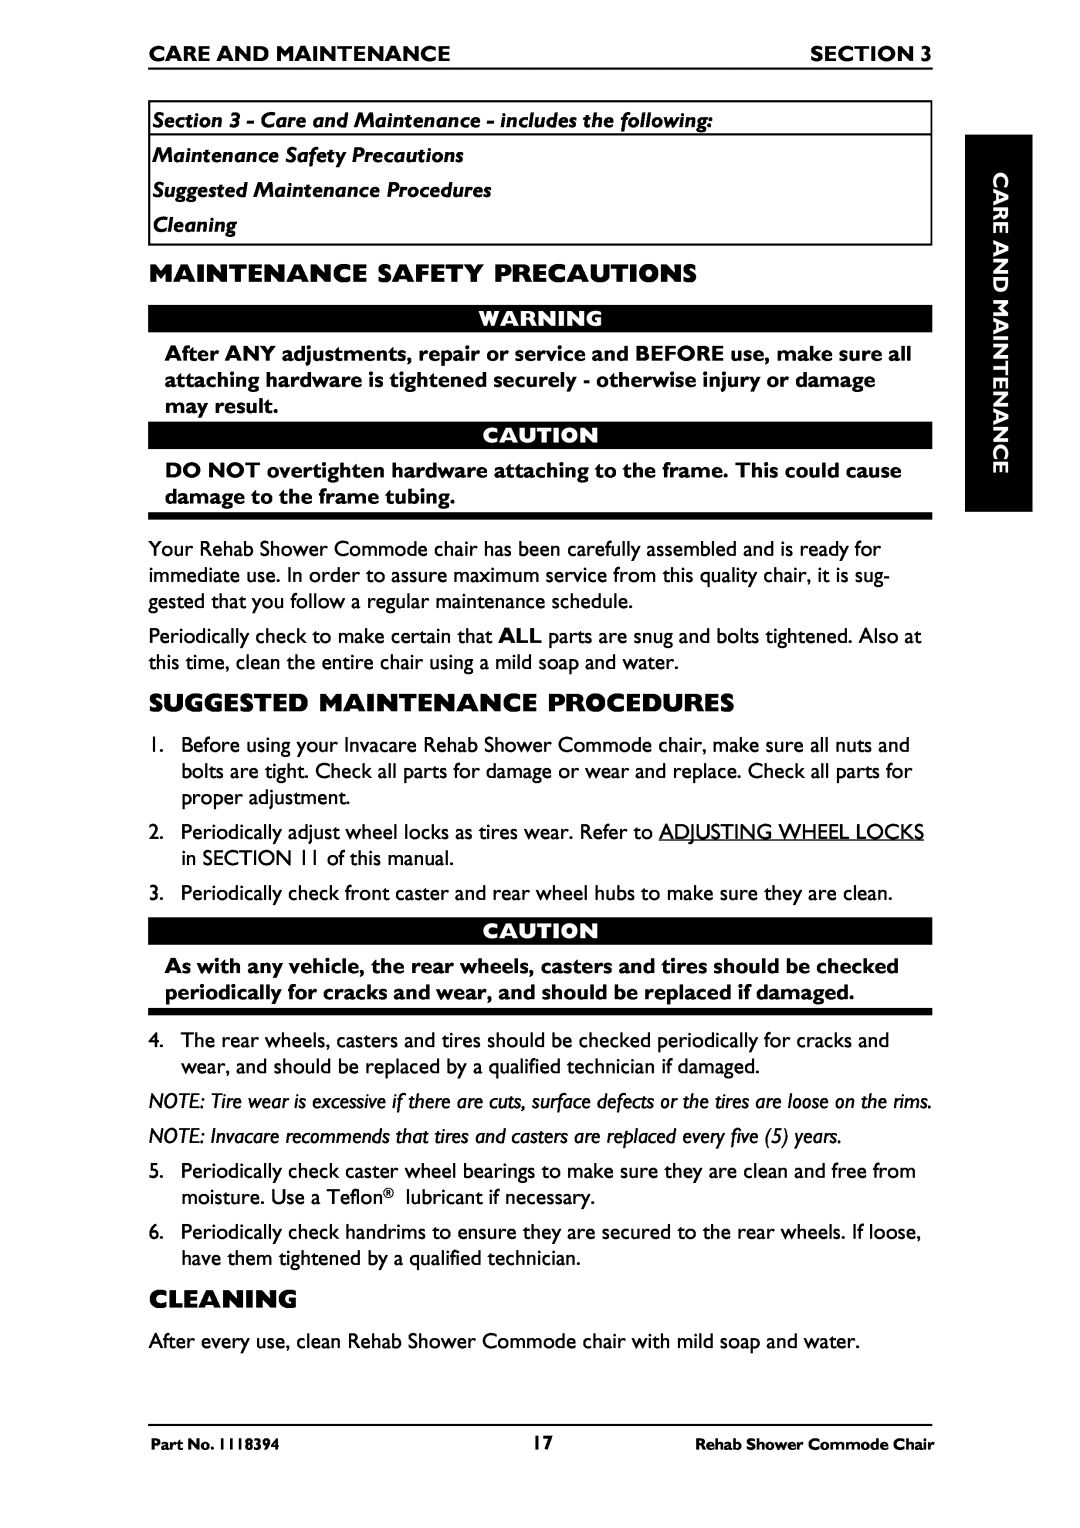 Invacare 6891 Maintenance Safety Precautions, Suggested Maintenance Procedures, Cleaning, Care And Maintenance, Section 